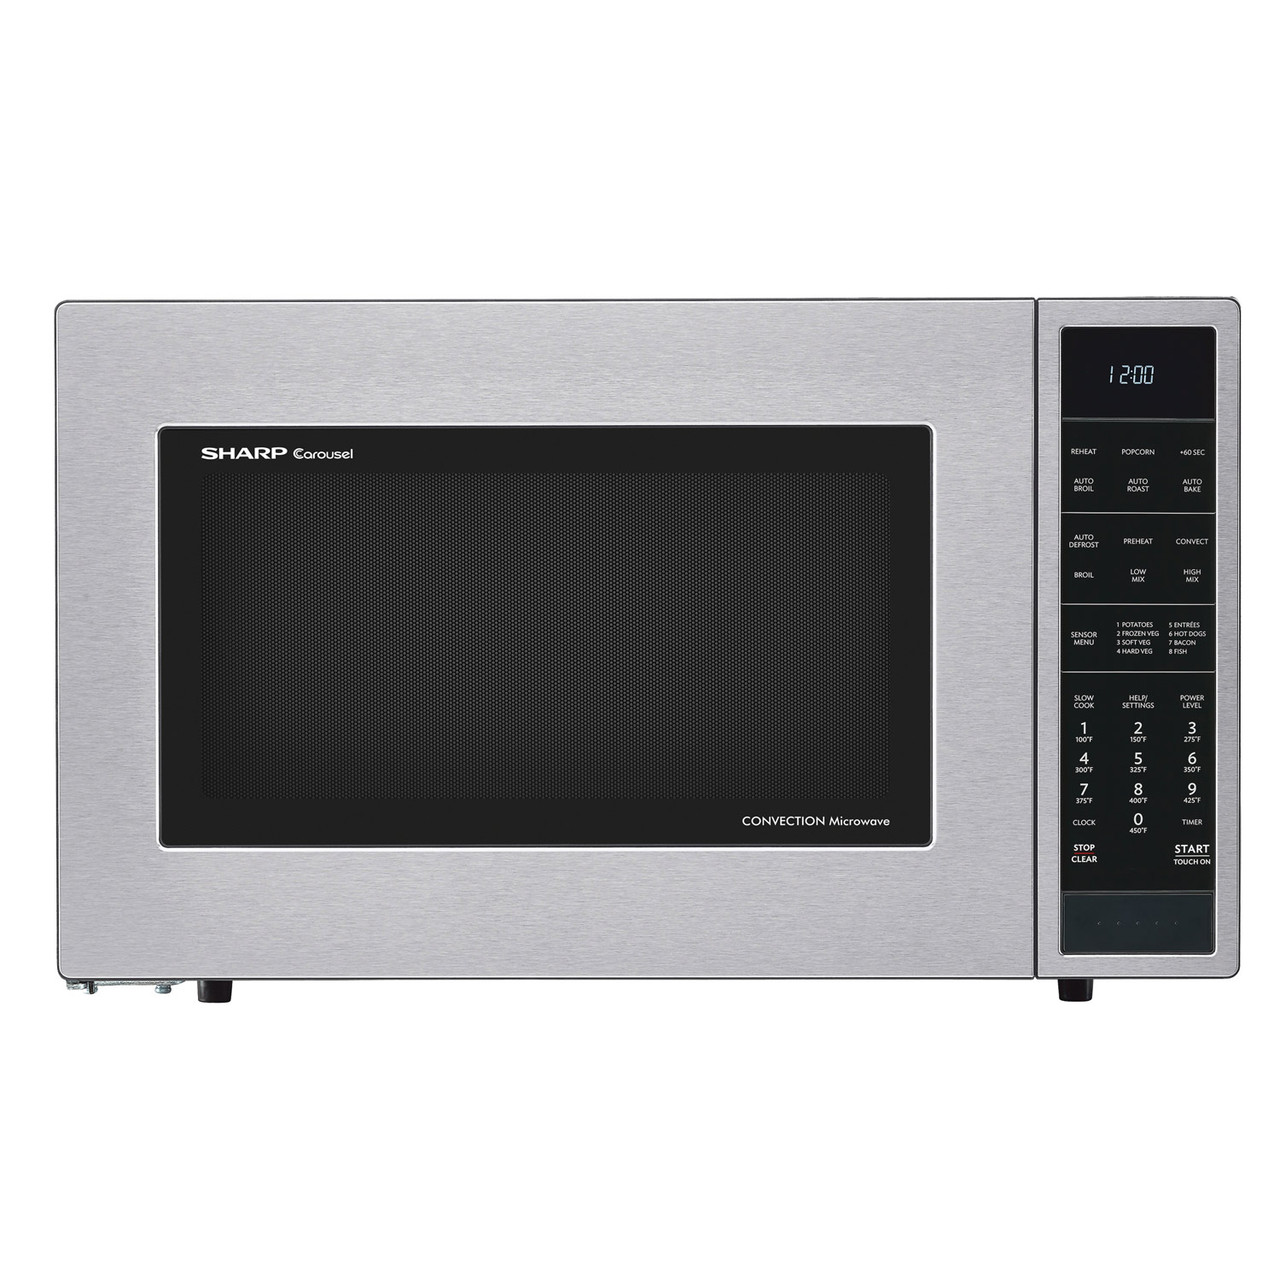 1.5 cu. ft. Sharp Stainless Steel Carousel Convection Microwave (SMC1585BS)